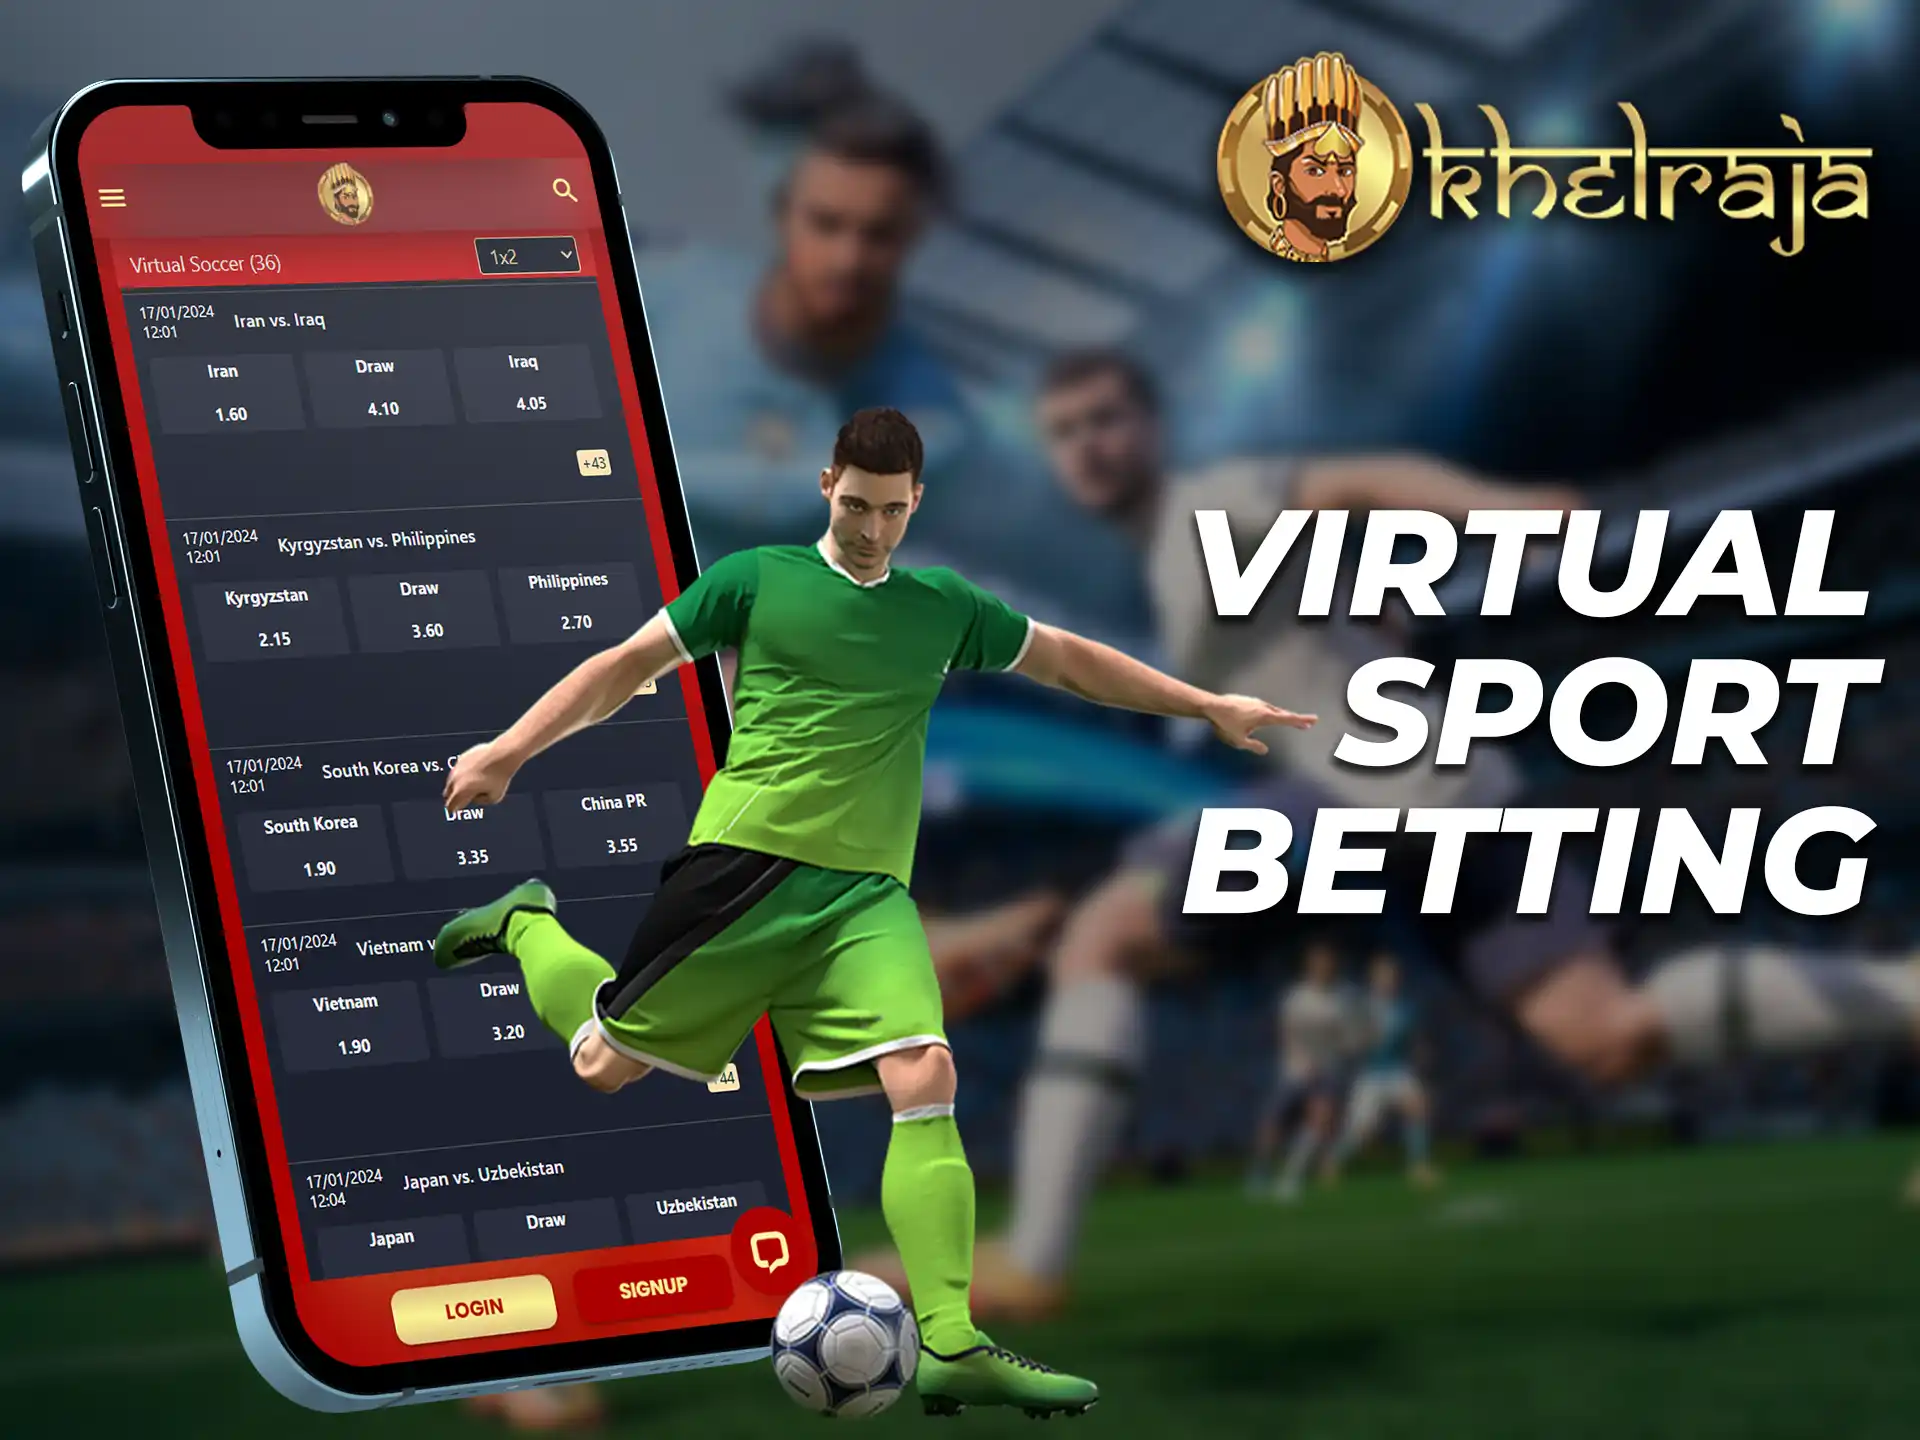 Place bets on virtual sports on the Khelraja app.